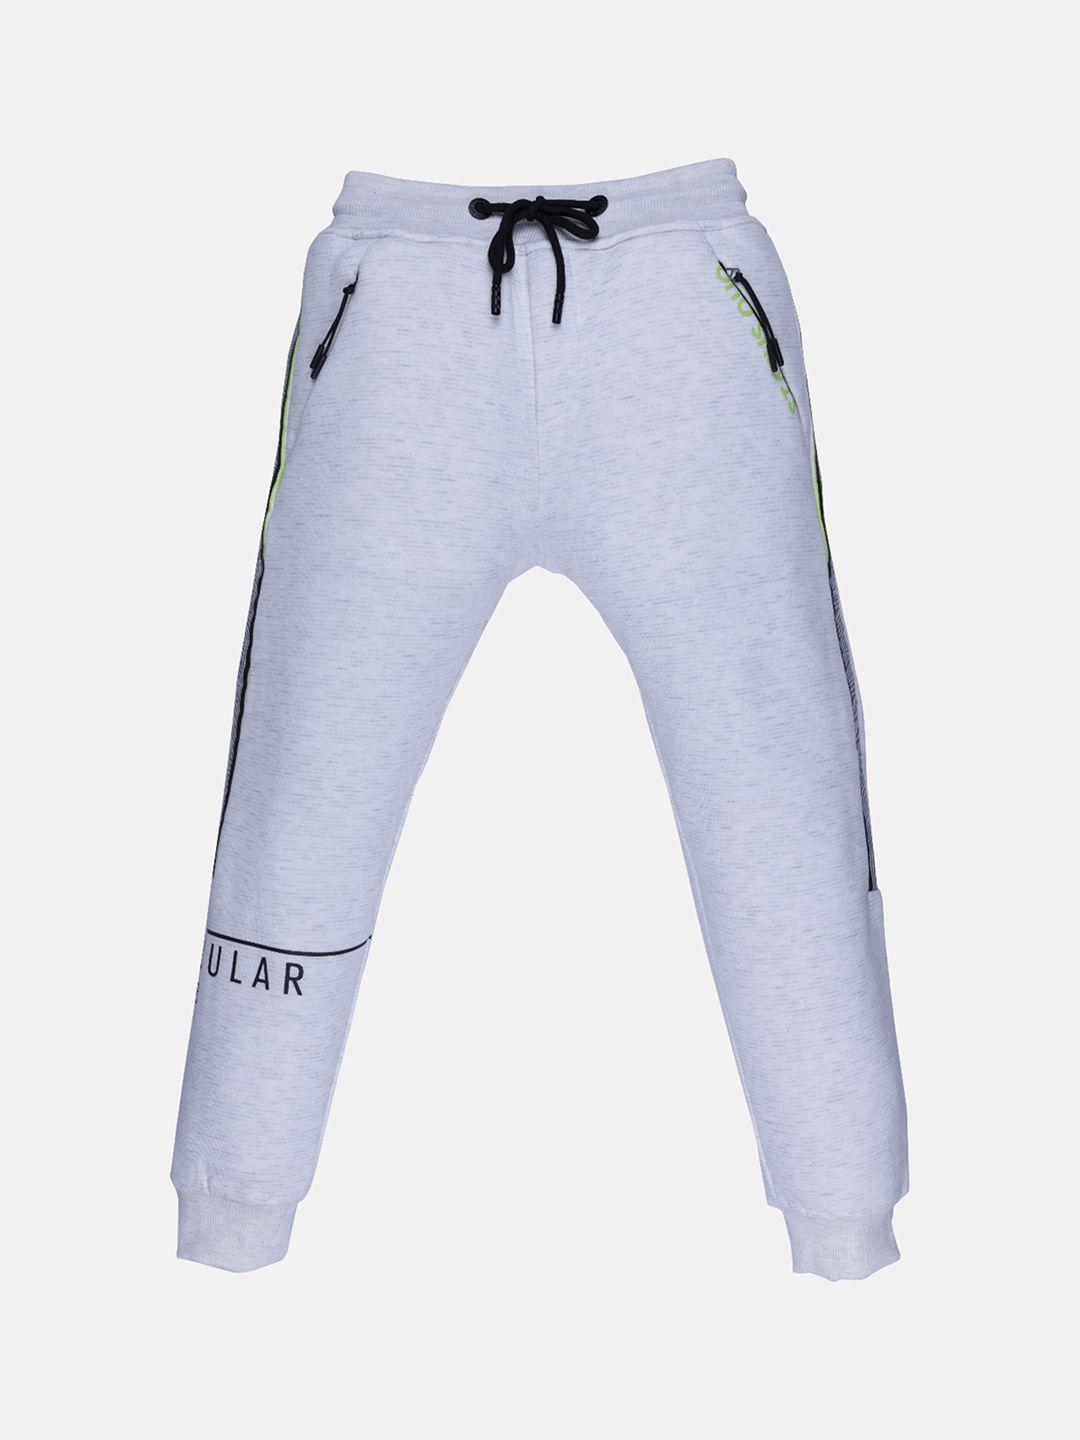 status quo boys off white solid cotton joggers